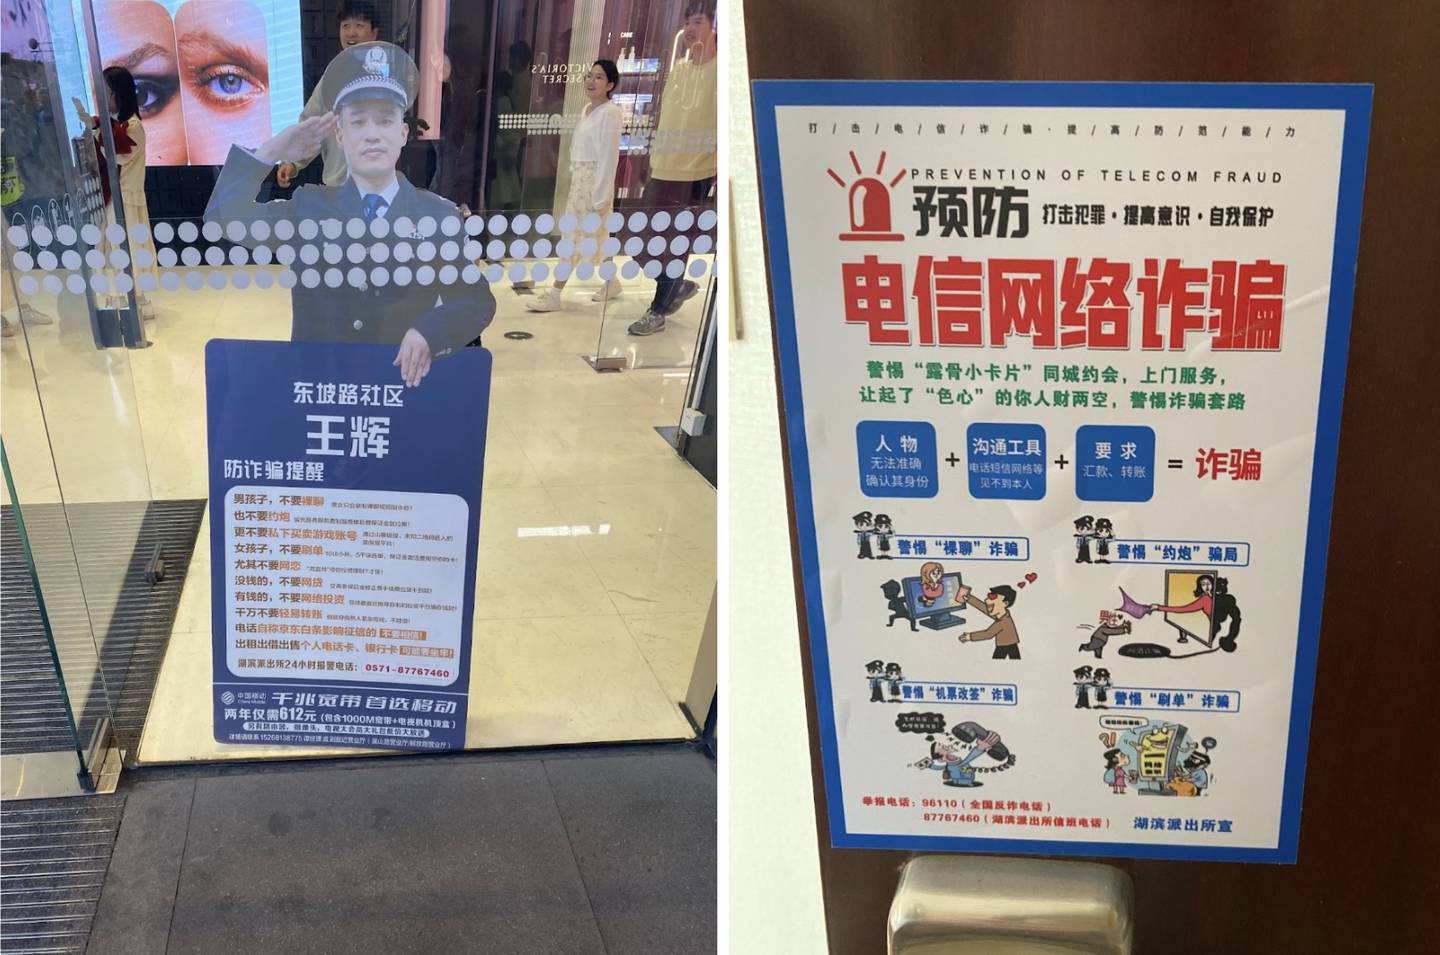 Scam warnings in a shopping mall and hotel room in Hangzhou.